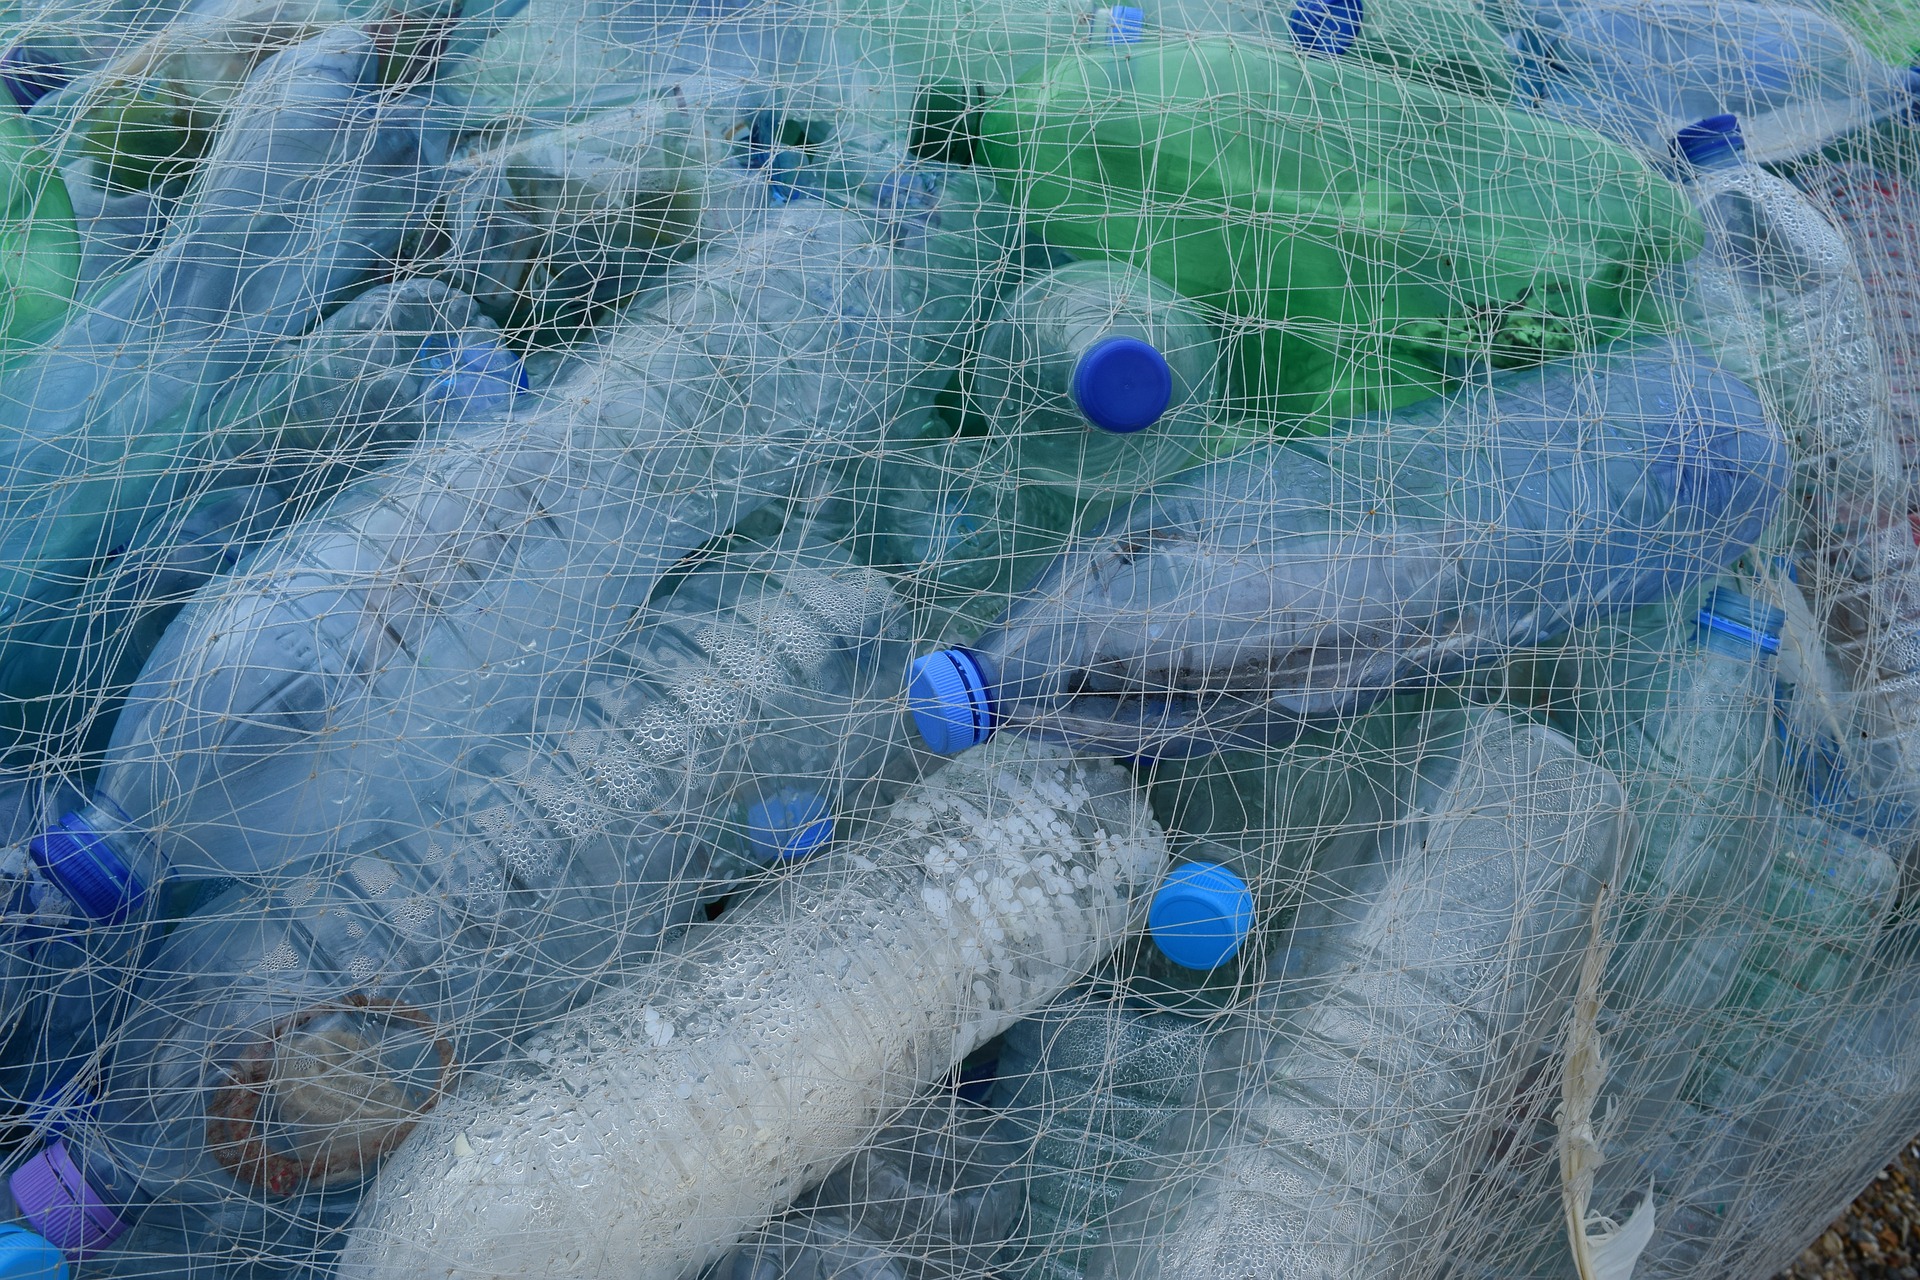 Plastic Pollution and How To Help